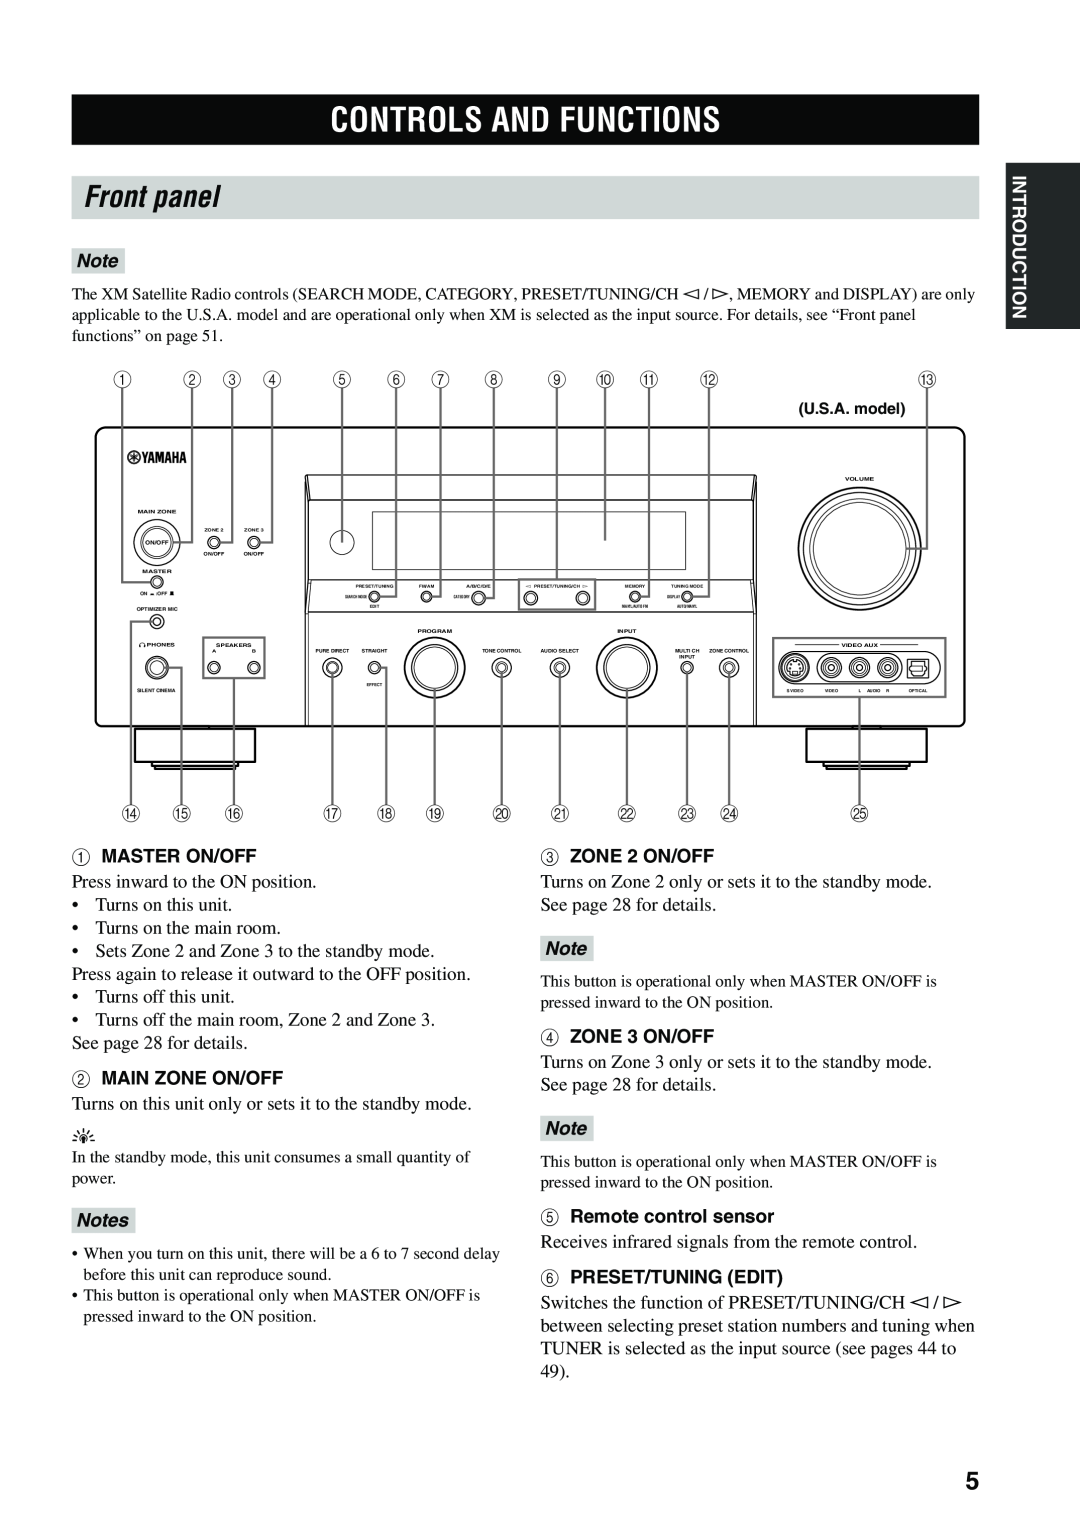 Yamaha HTR-5990 owner manual Controls And Functions, Front panel 